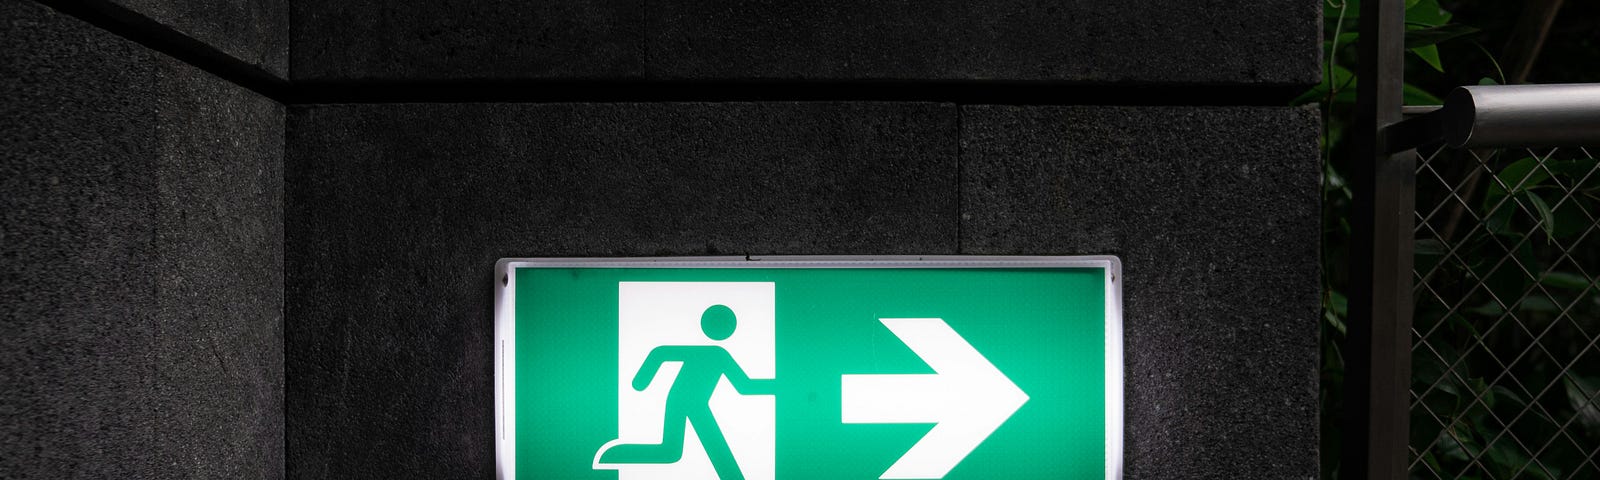 Illuminated exit sign with arrow pointing right.